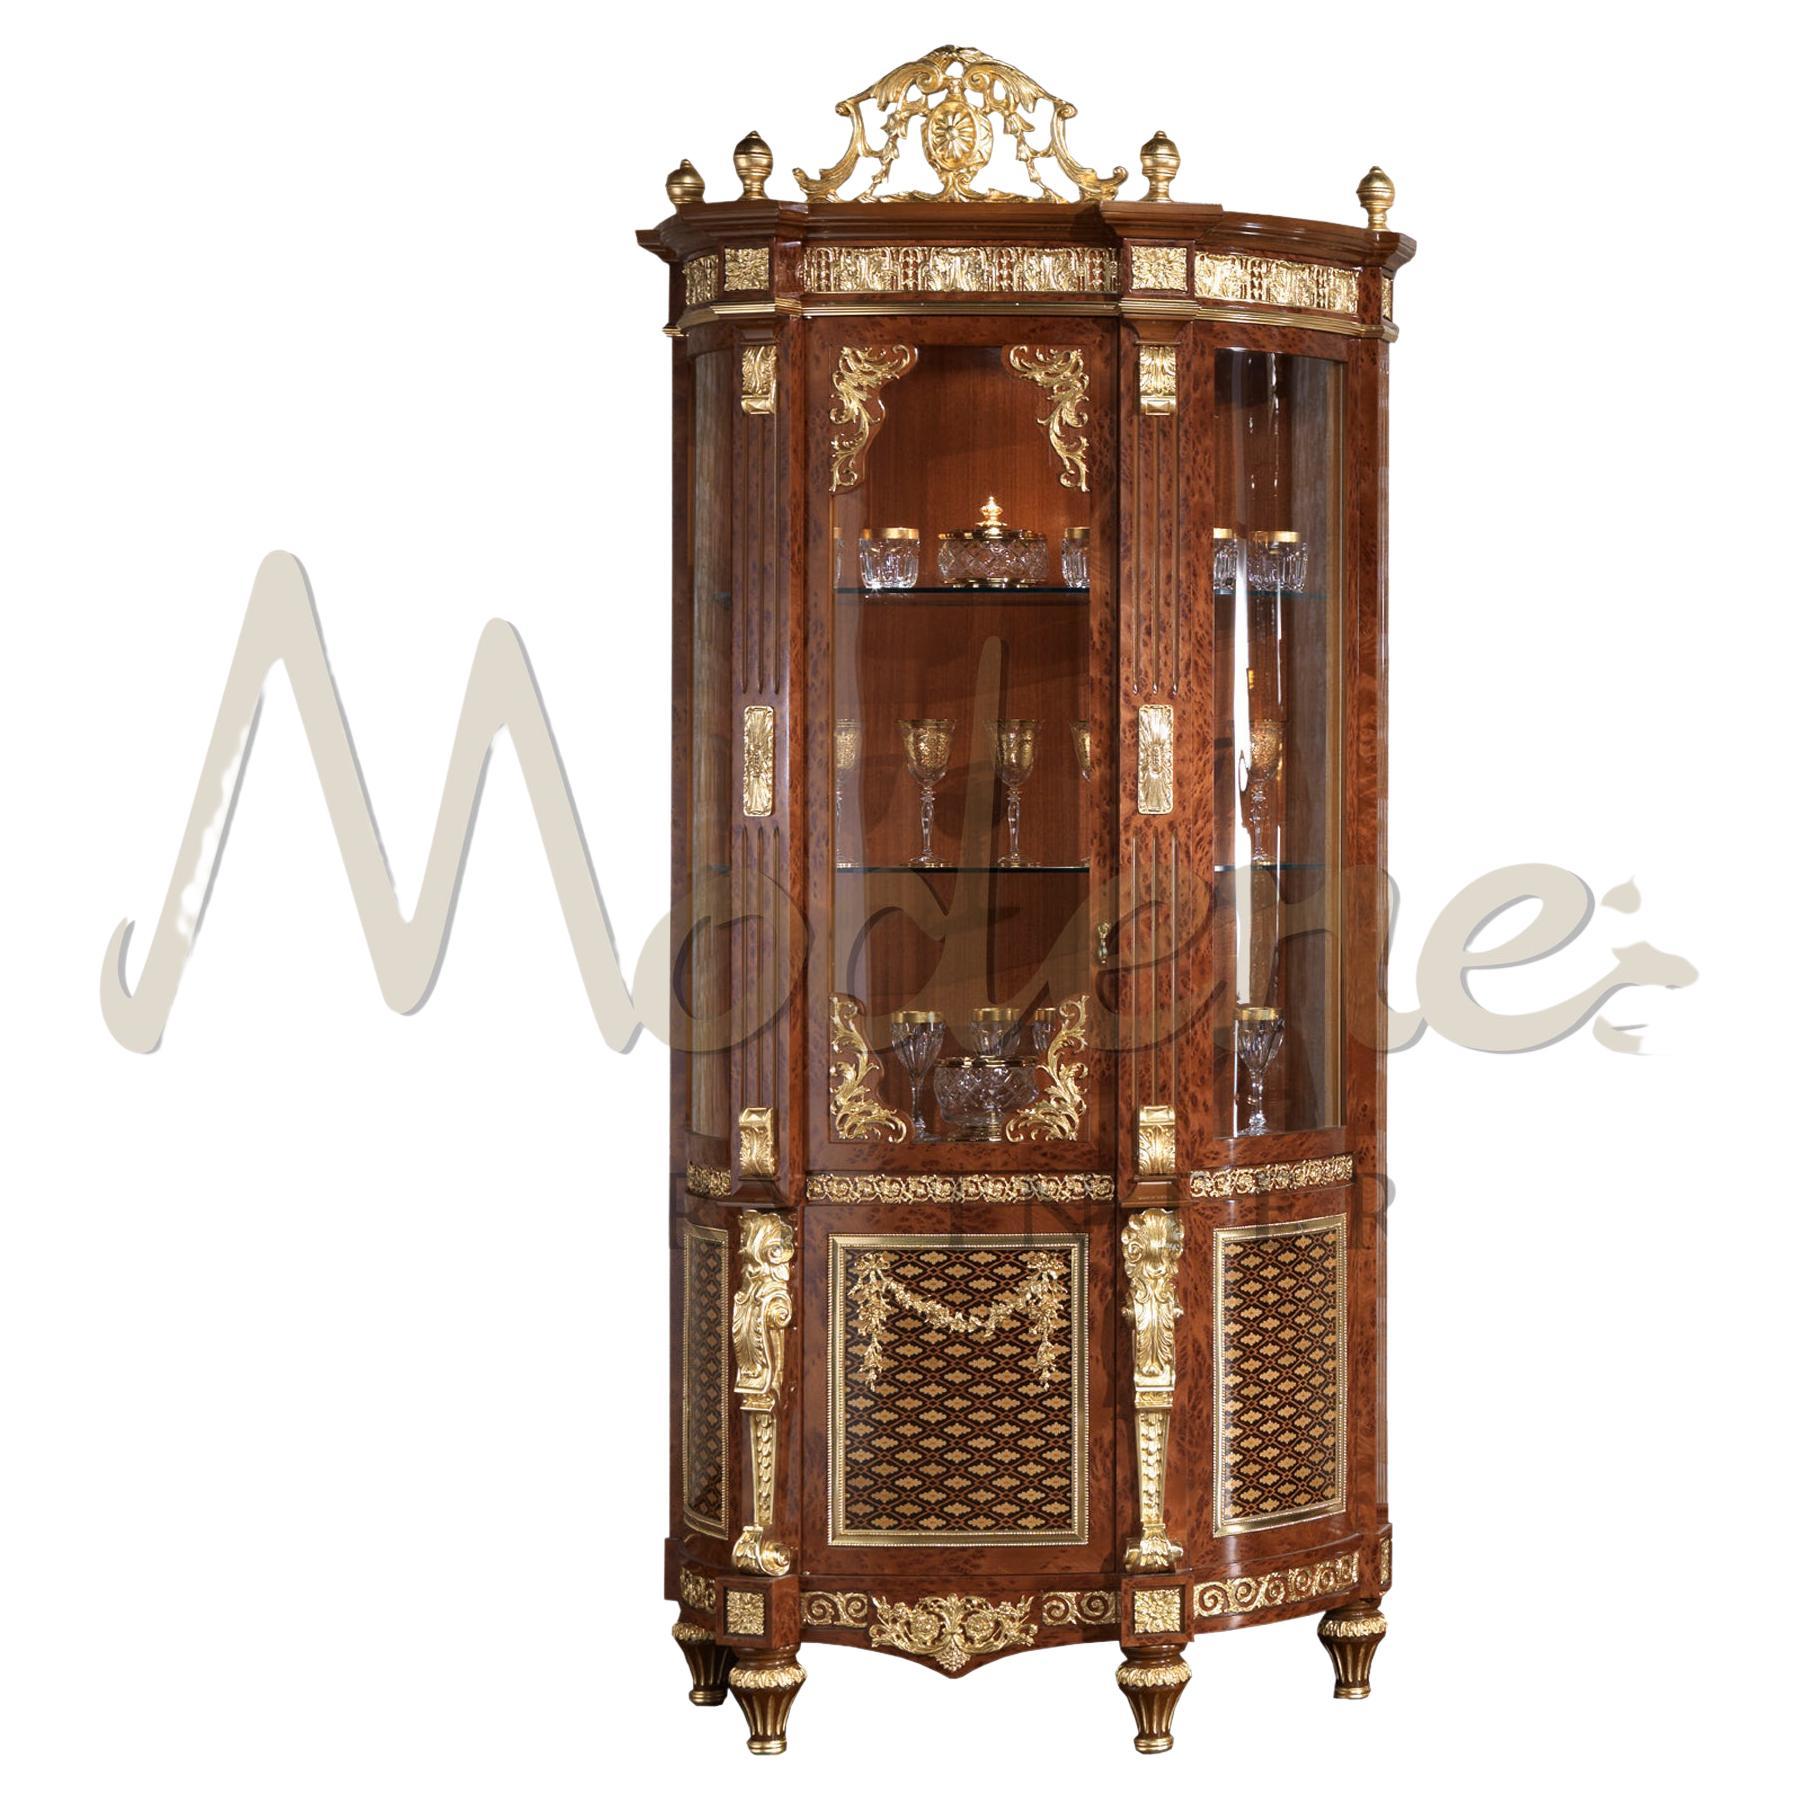 Exceptional Italian furniture, a unique and exclusive piece of coin cabinet from Modenese Interiors Luxury production. Its dramatic use of veneers from elm, walnut and maple gives the right contrast to the natural finishing of this item, which is